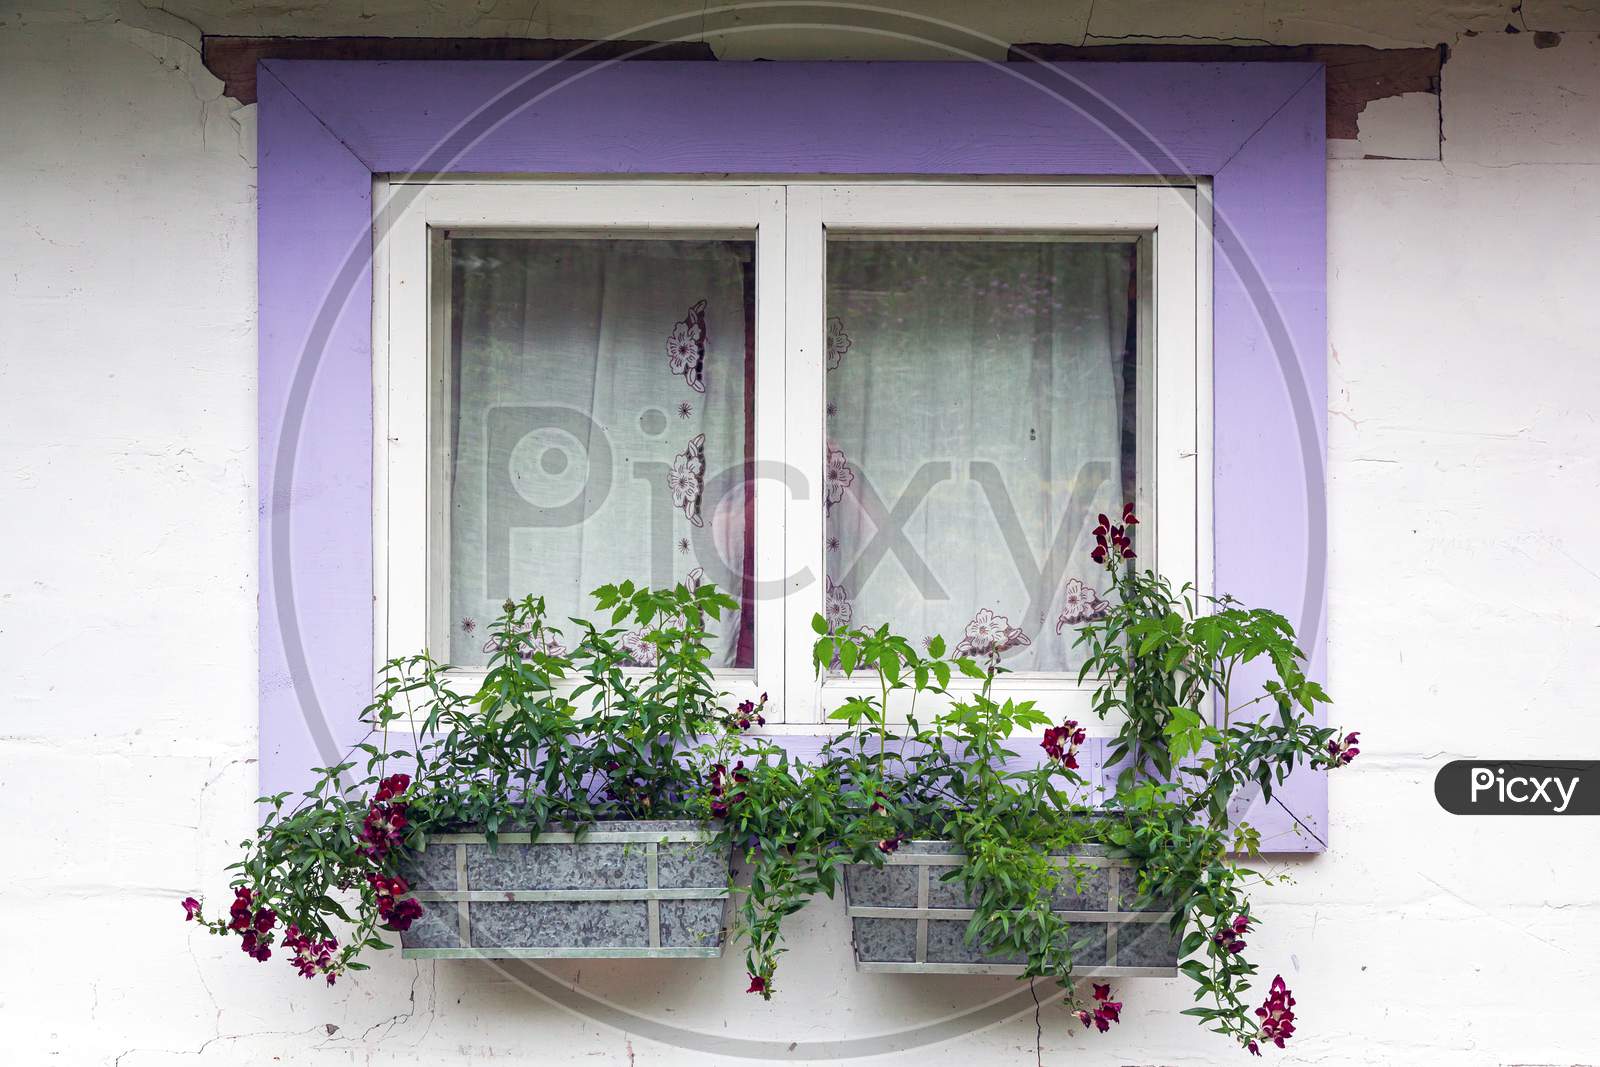 Close-Up Of A Charming Window Of A White Old House With Violet Wooden Shutters And Decorated With Pots Of Green Plants And Flowers